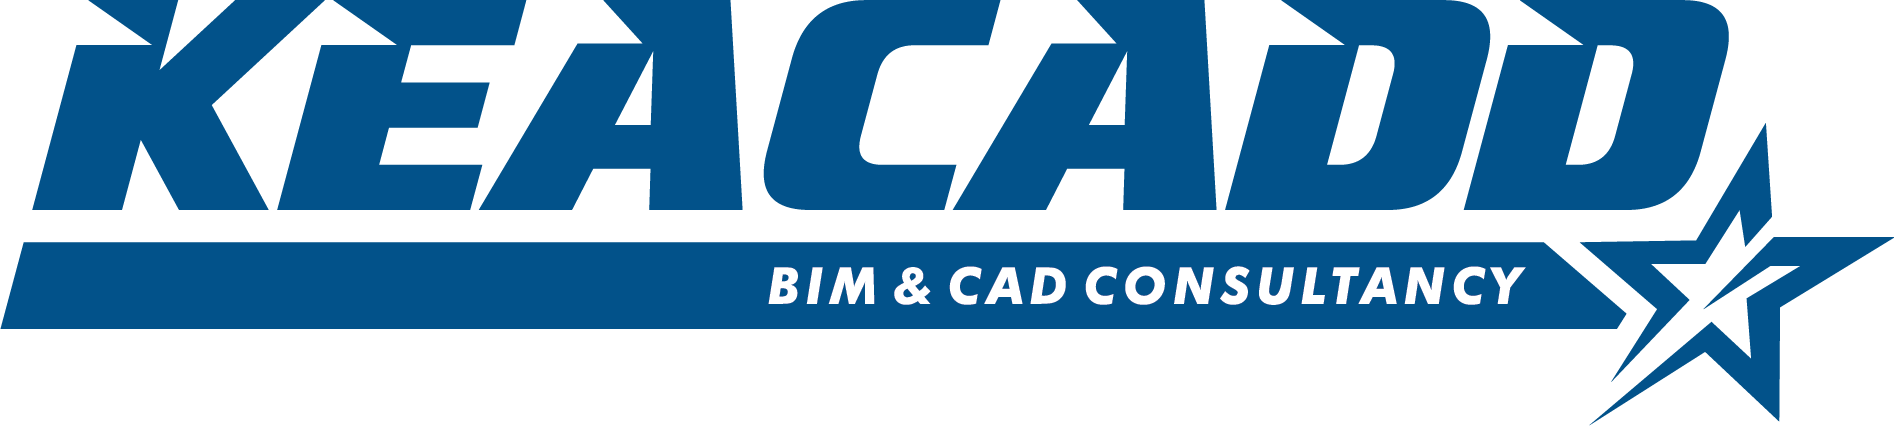 More about KEACADD Bim & Cad Consultancy